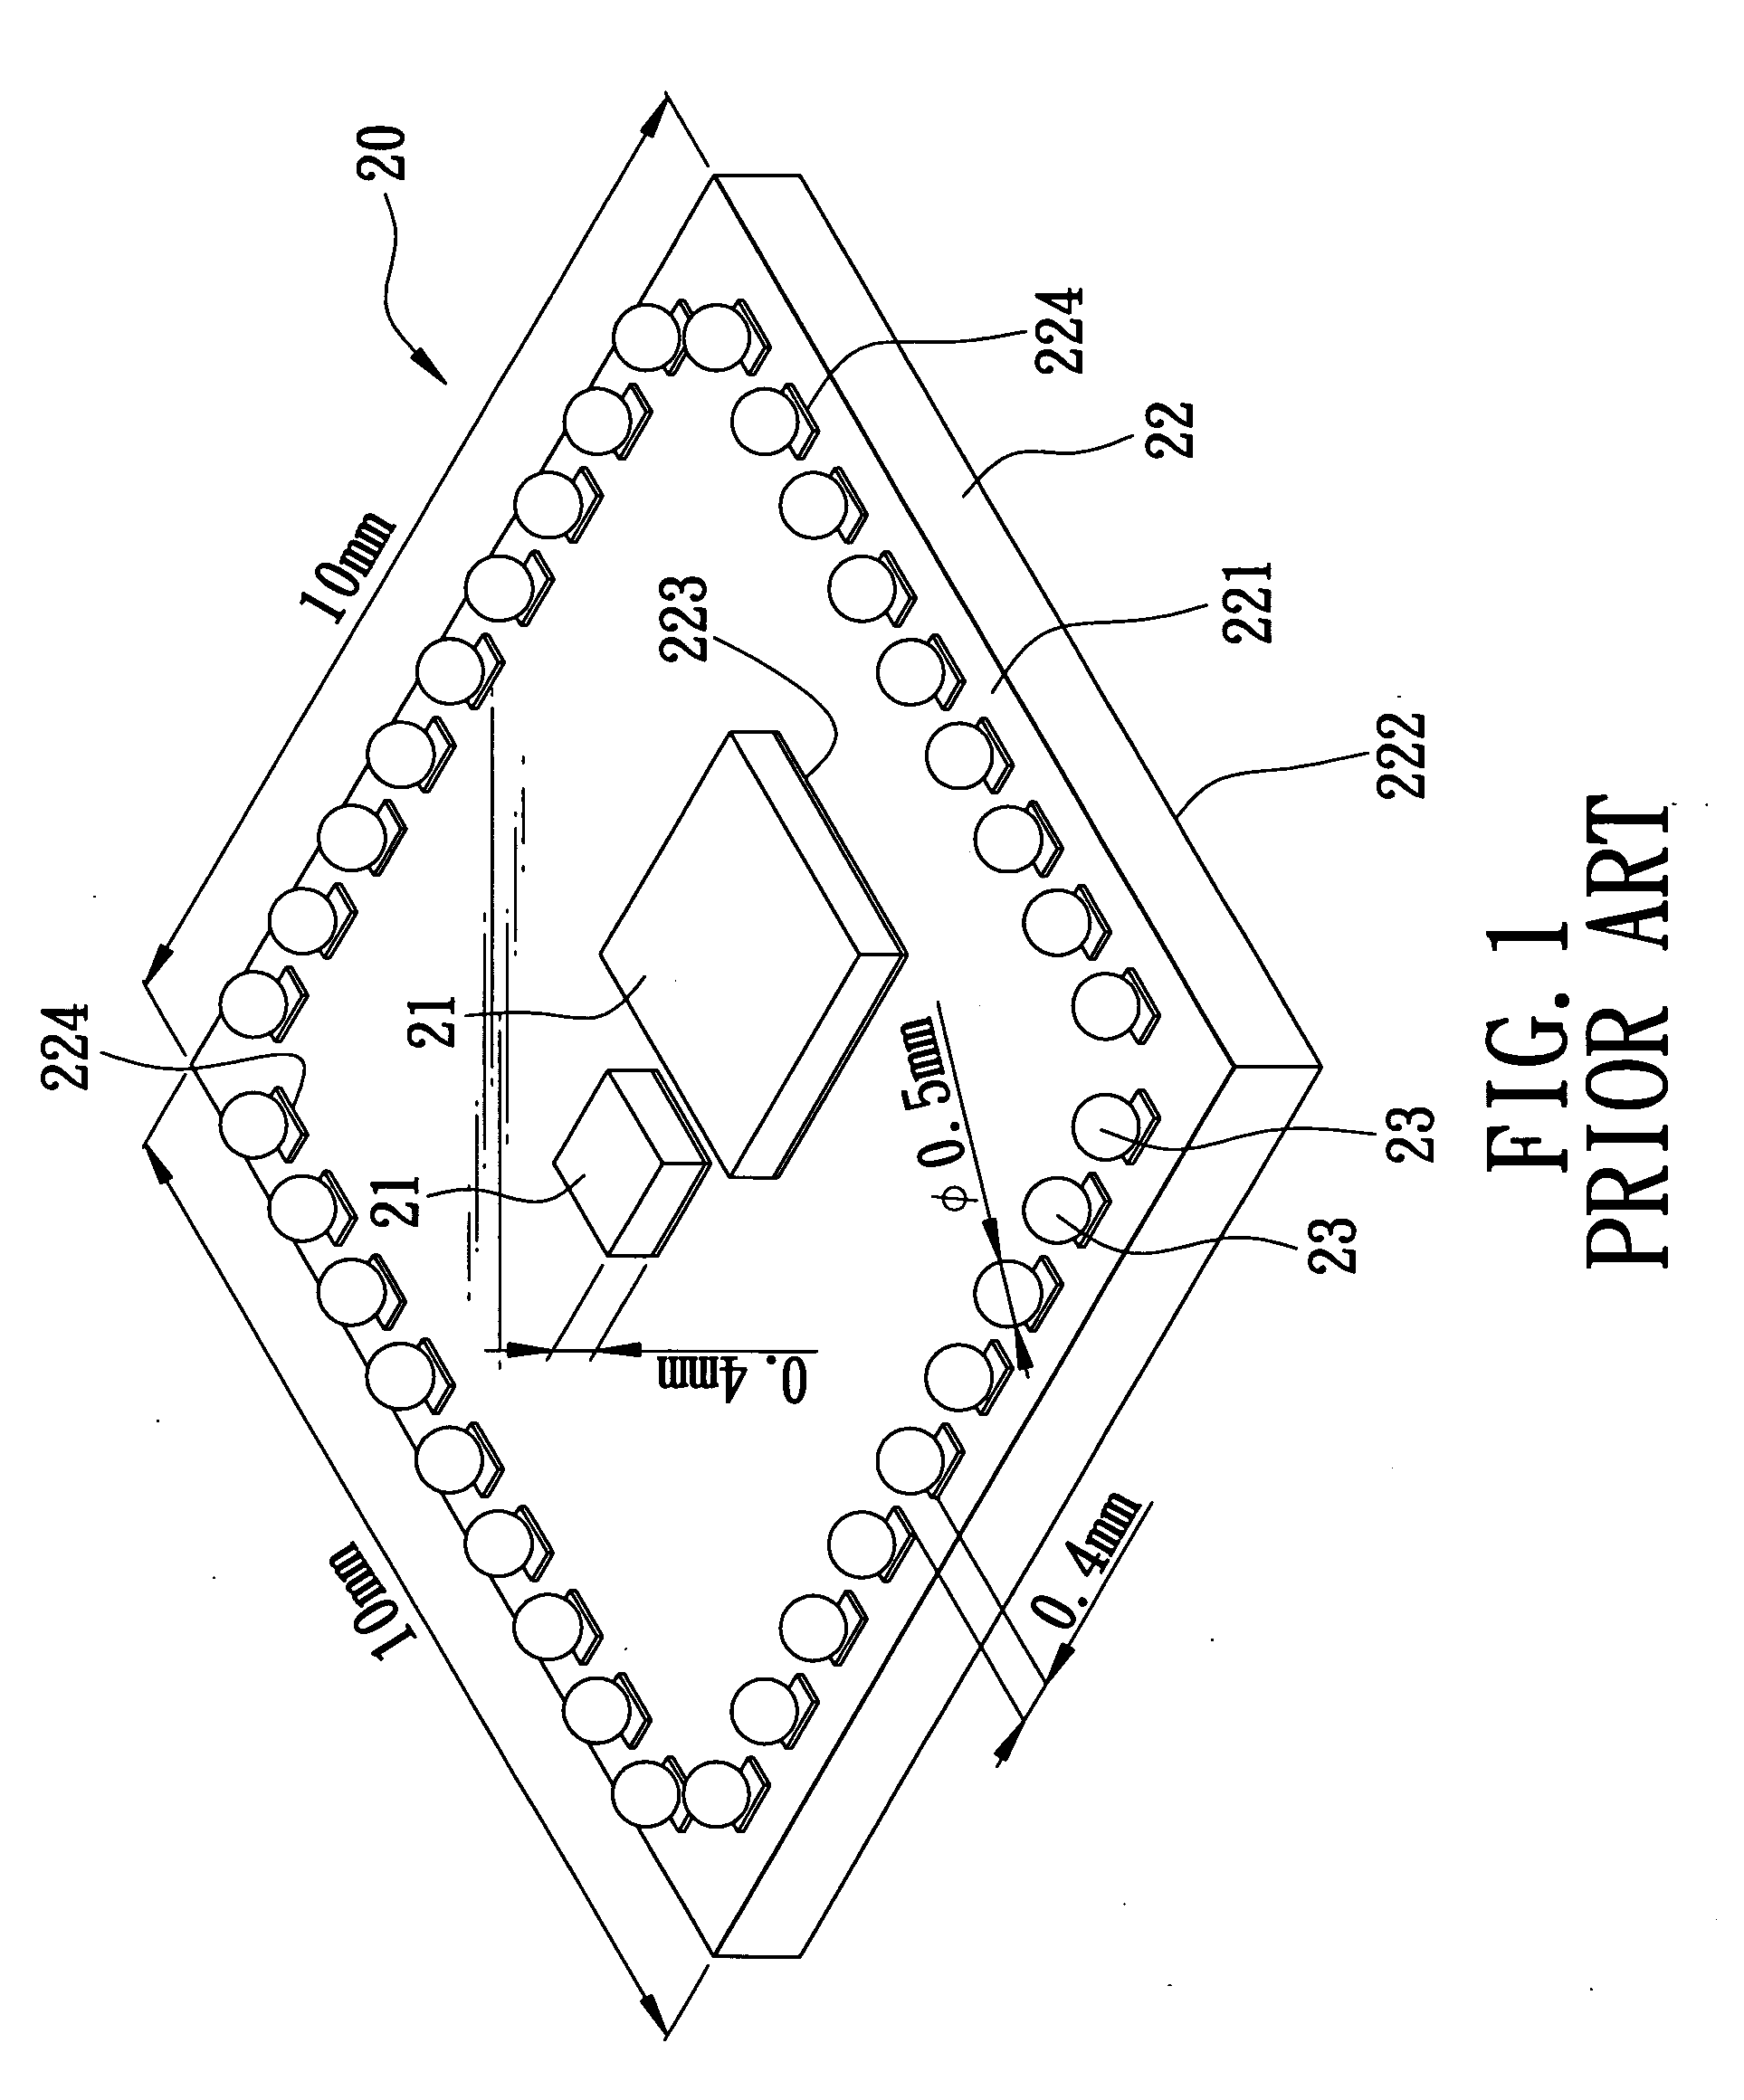 Miniaturized multi-chip module and method for manufacturing the same